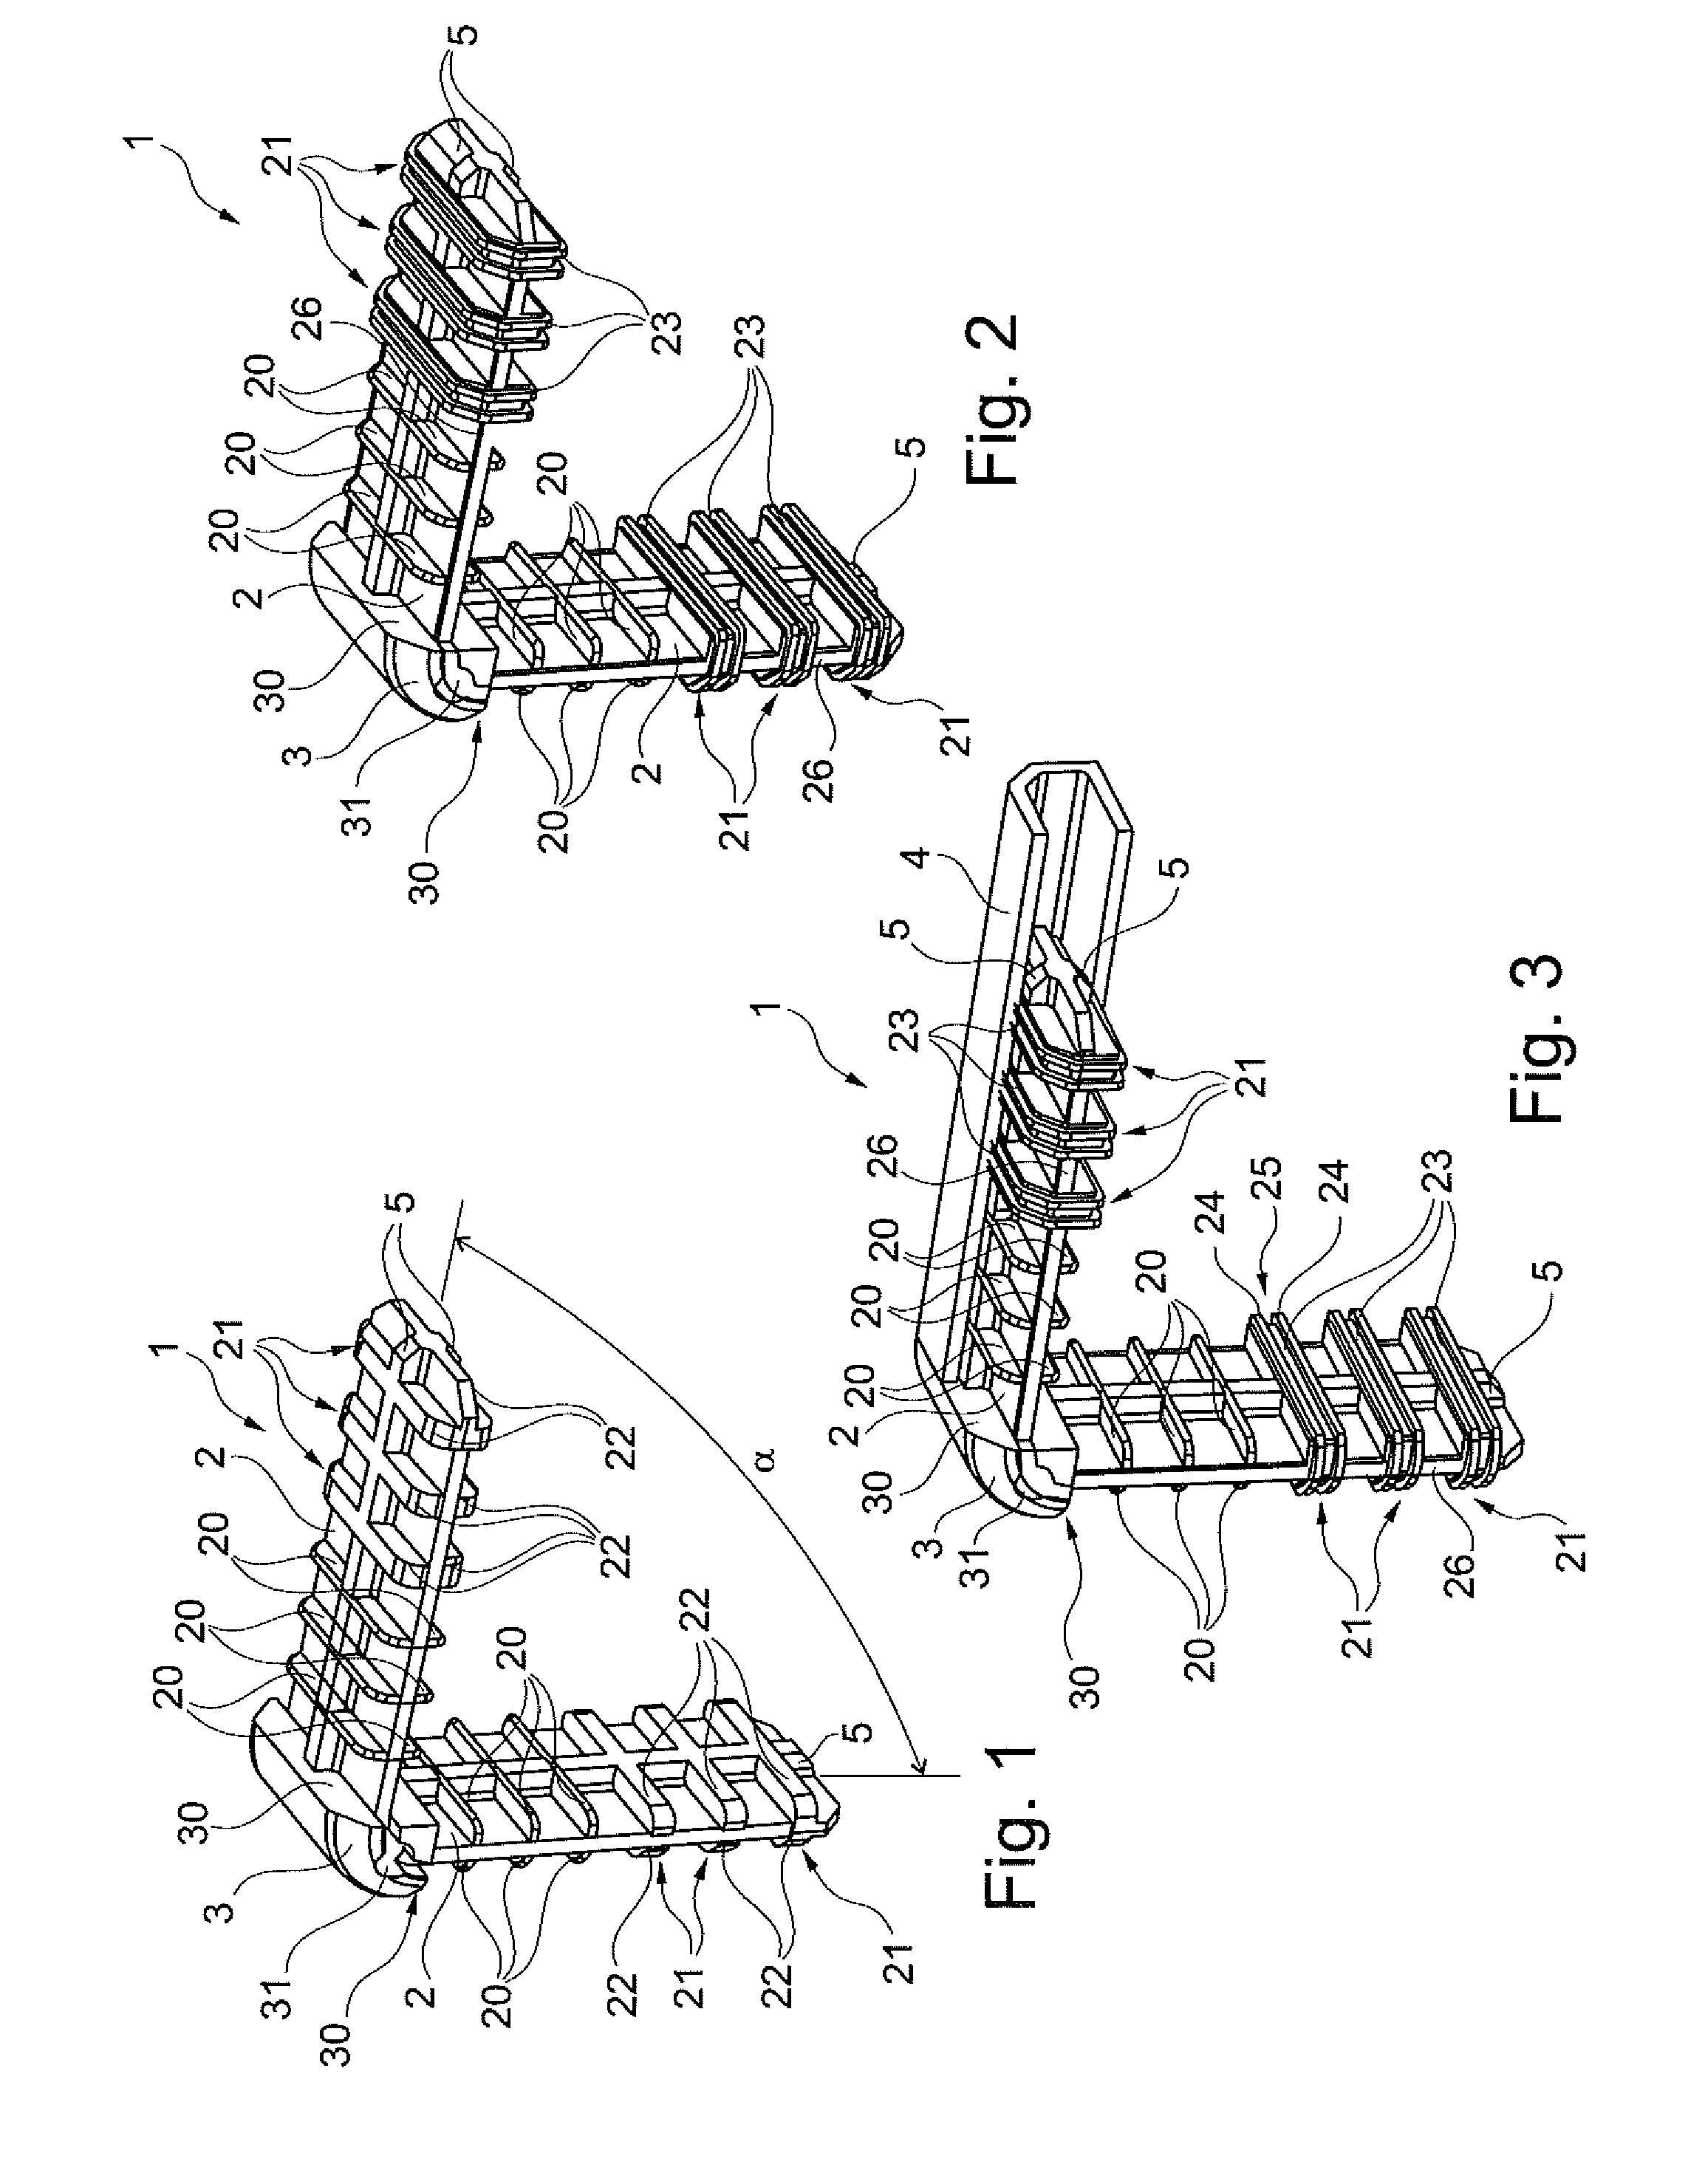 Connector for hollow portions of profile member(s), particularly for double-pane window frames